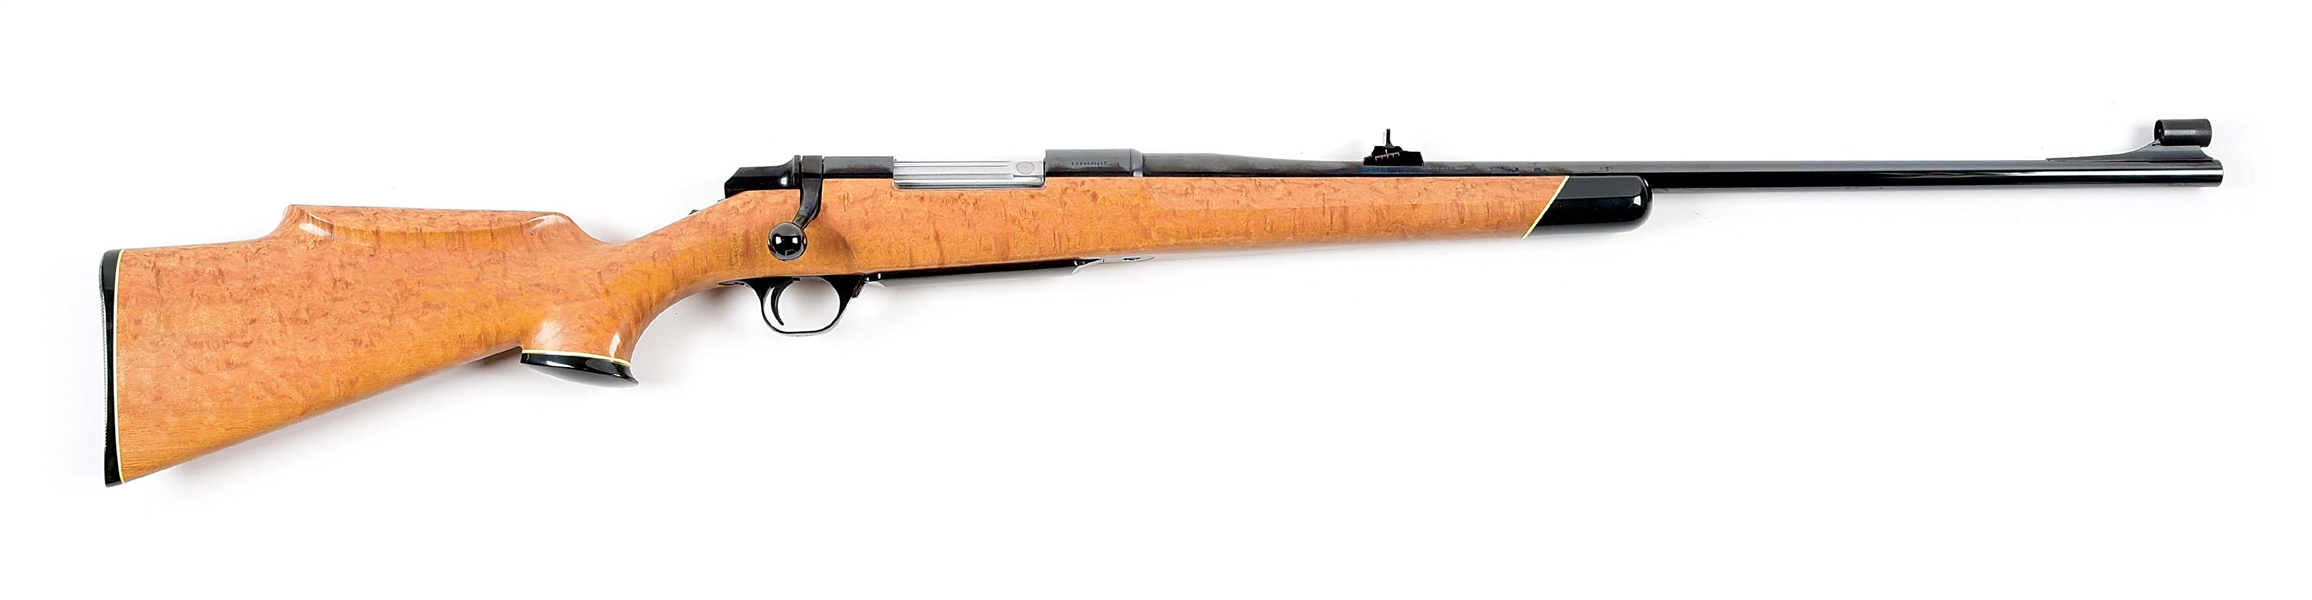 (M) BROWNING BBR BOLT ACTION RIFLE WITH BLUEGUM STOCK.